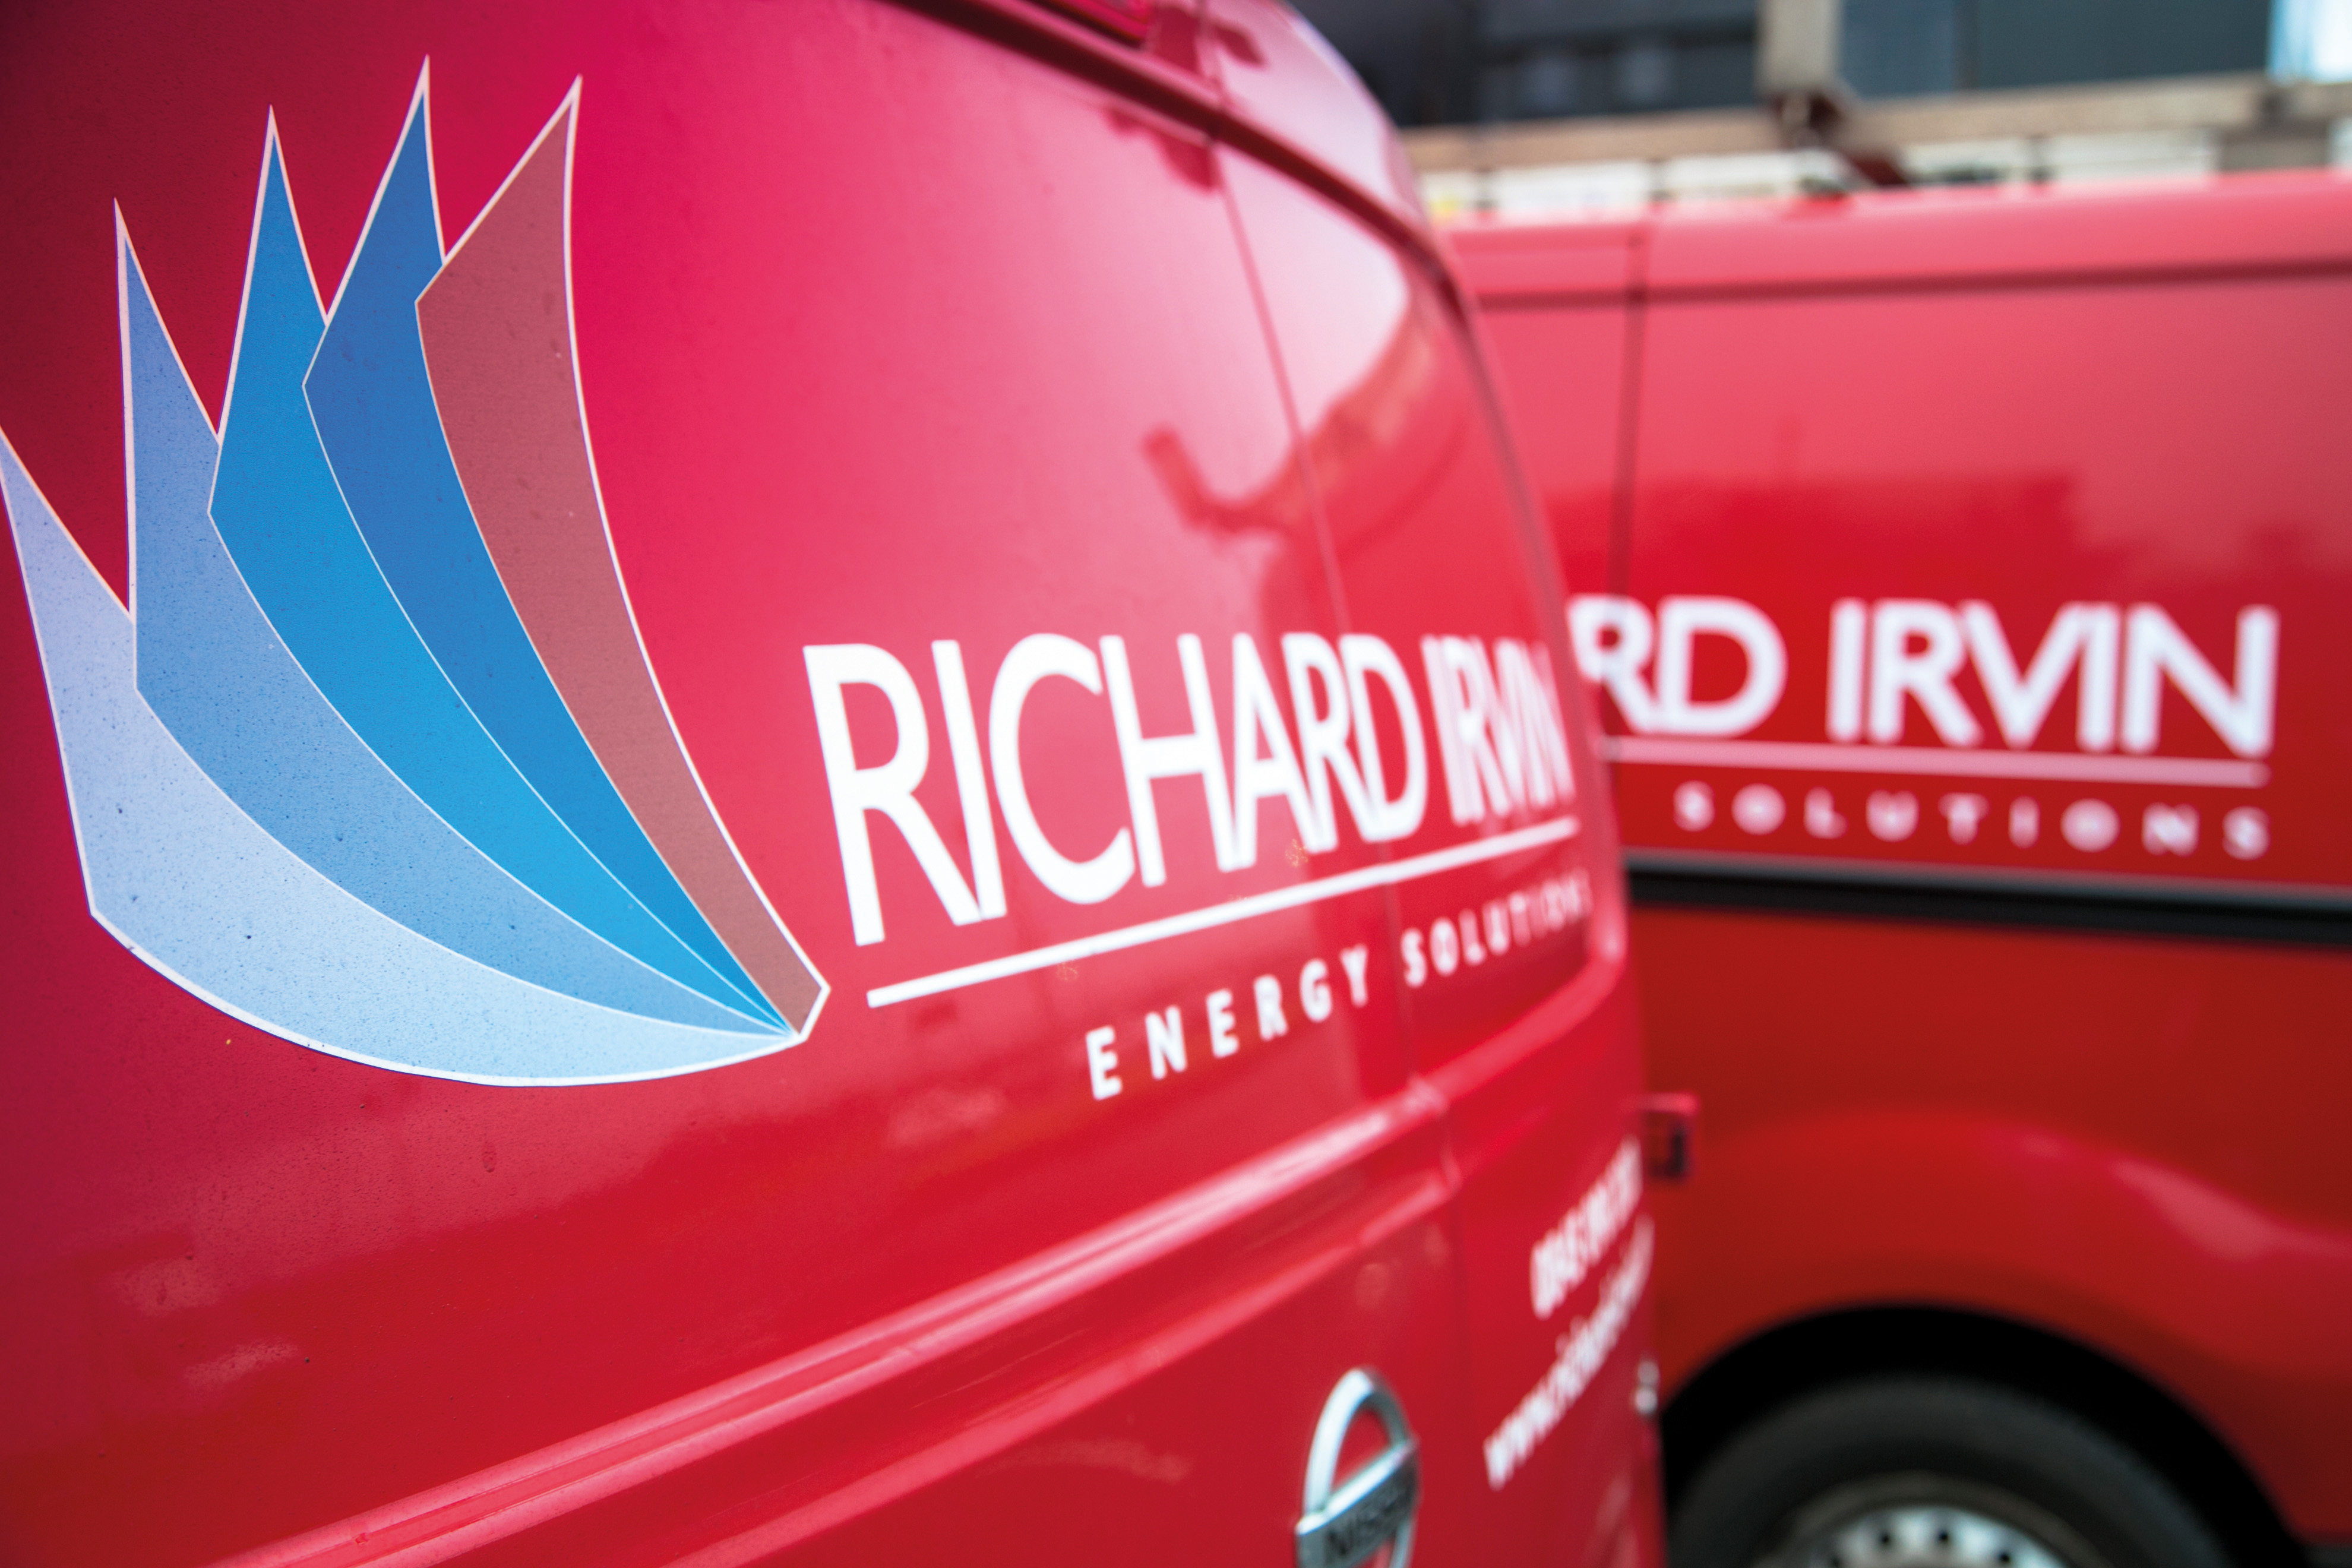 Richard Irvin FM wins £670m worth of contracts in Scotland and North of England